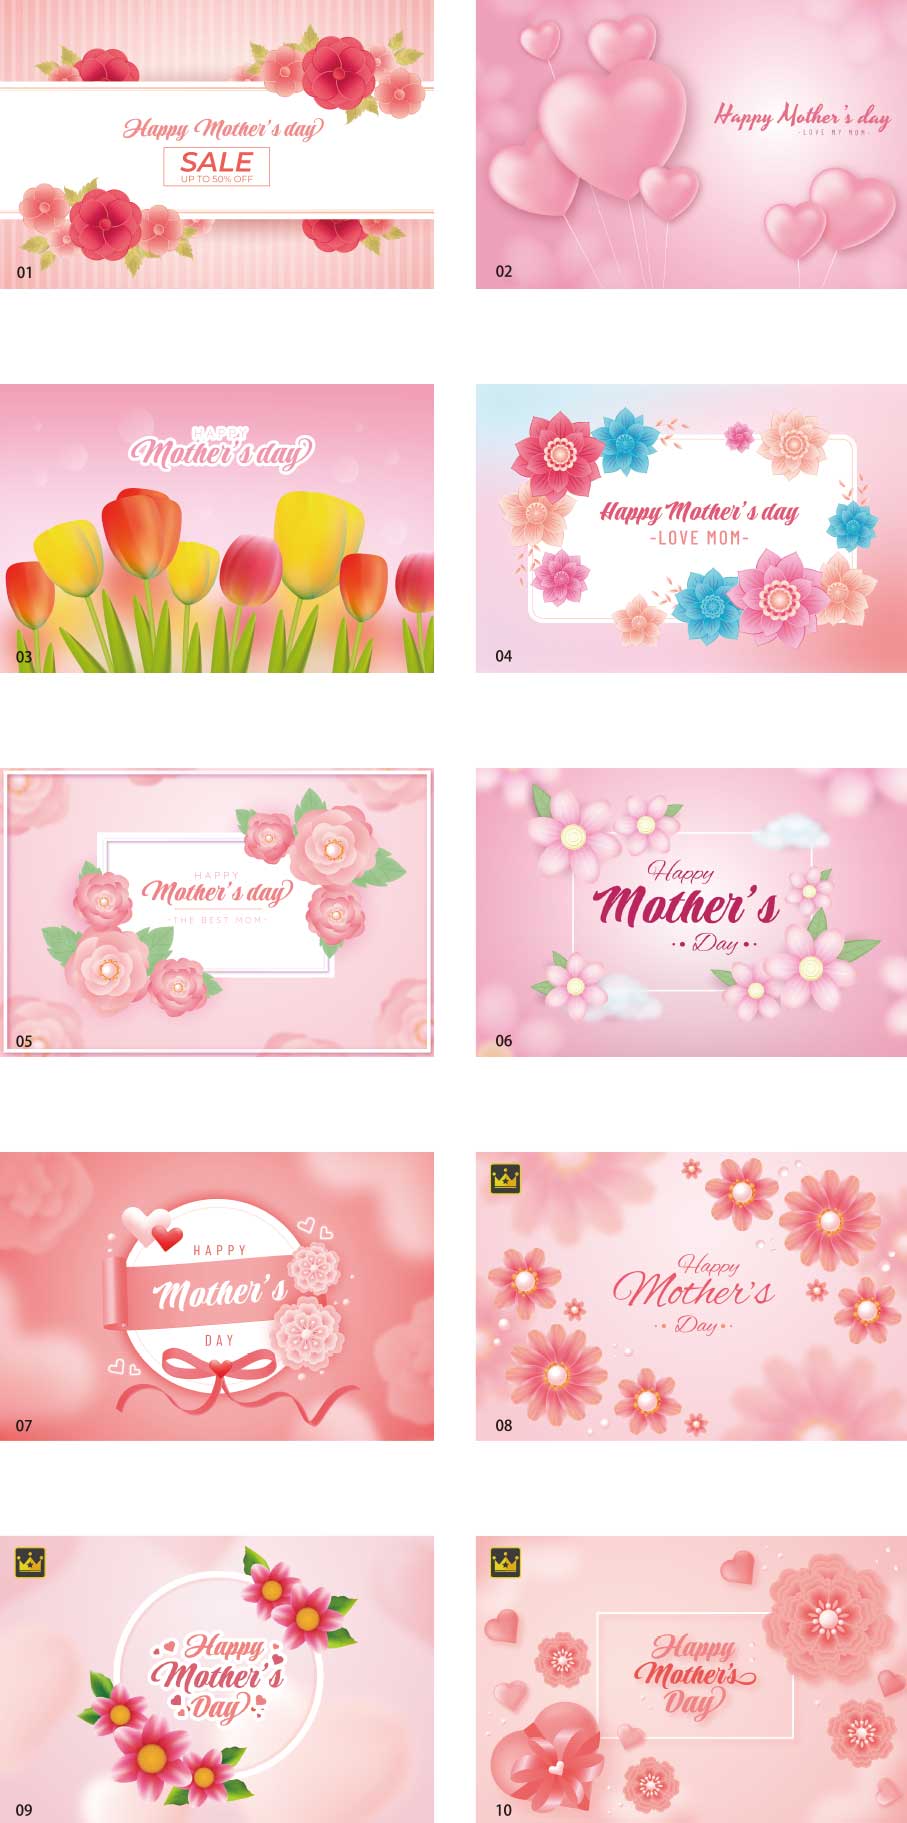 Mother's Day 3D Background vol.1